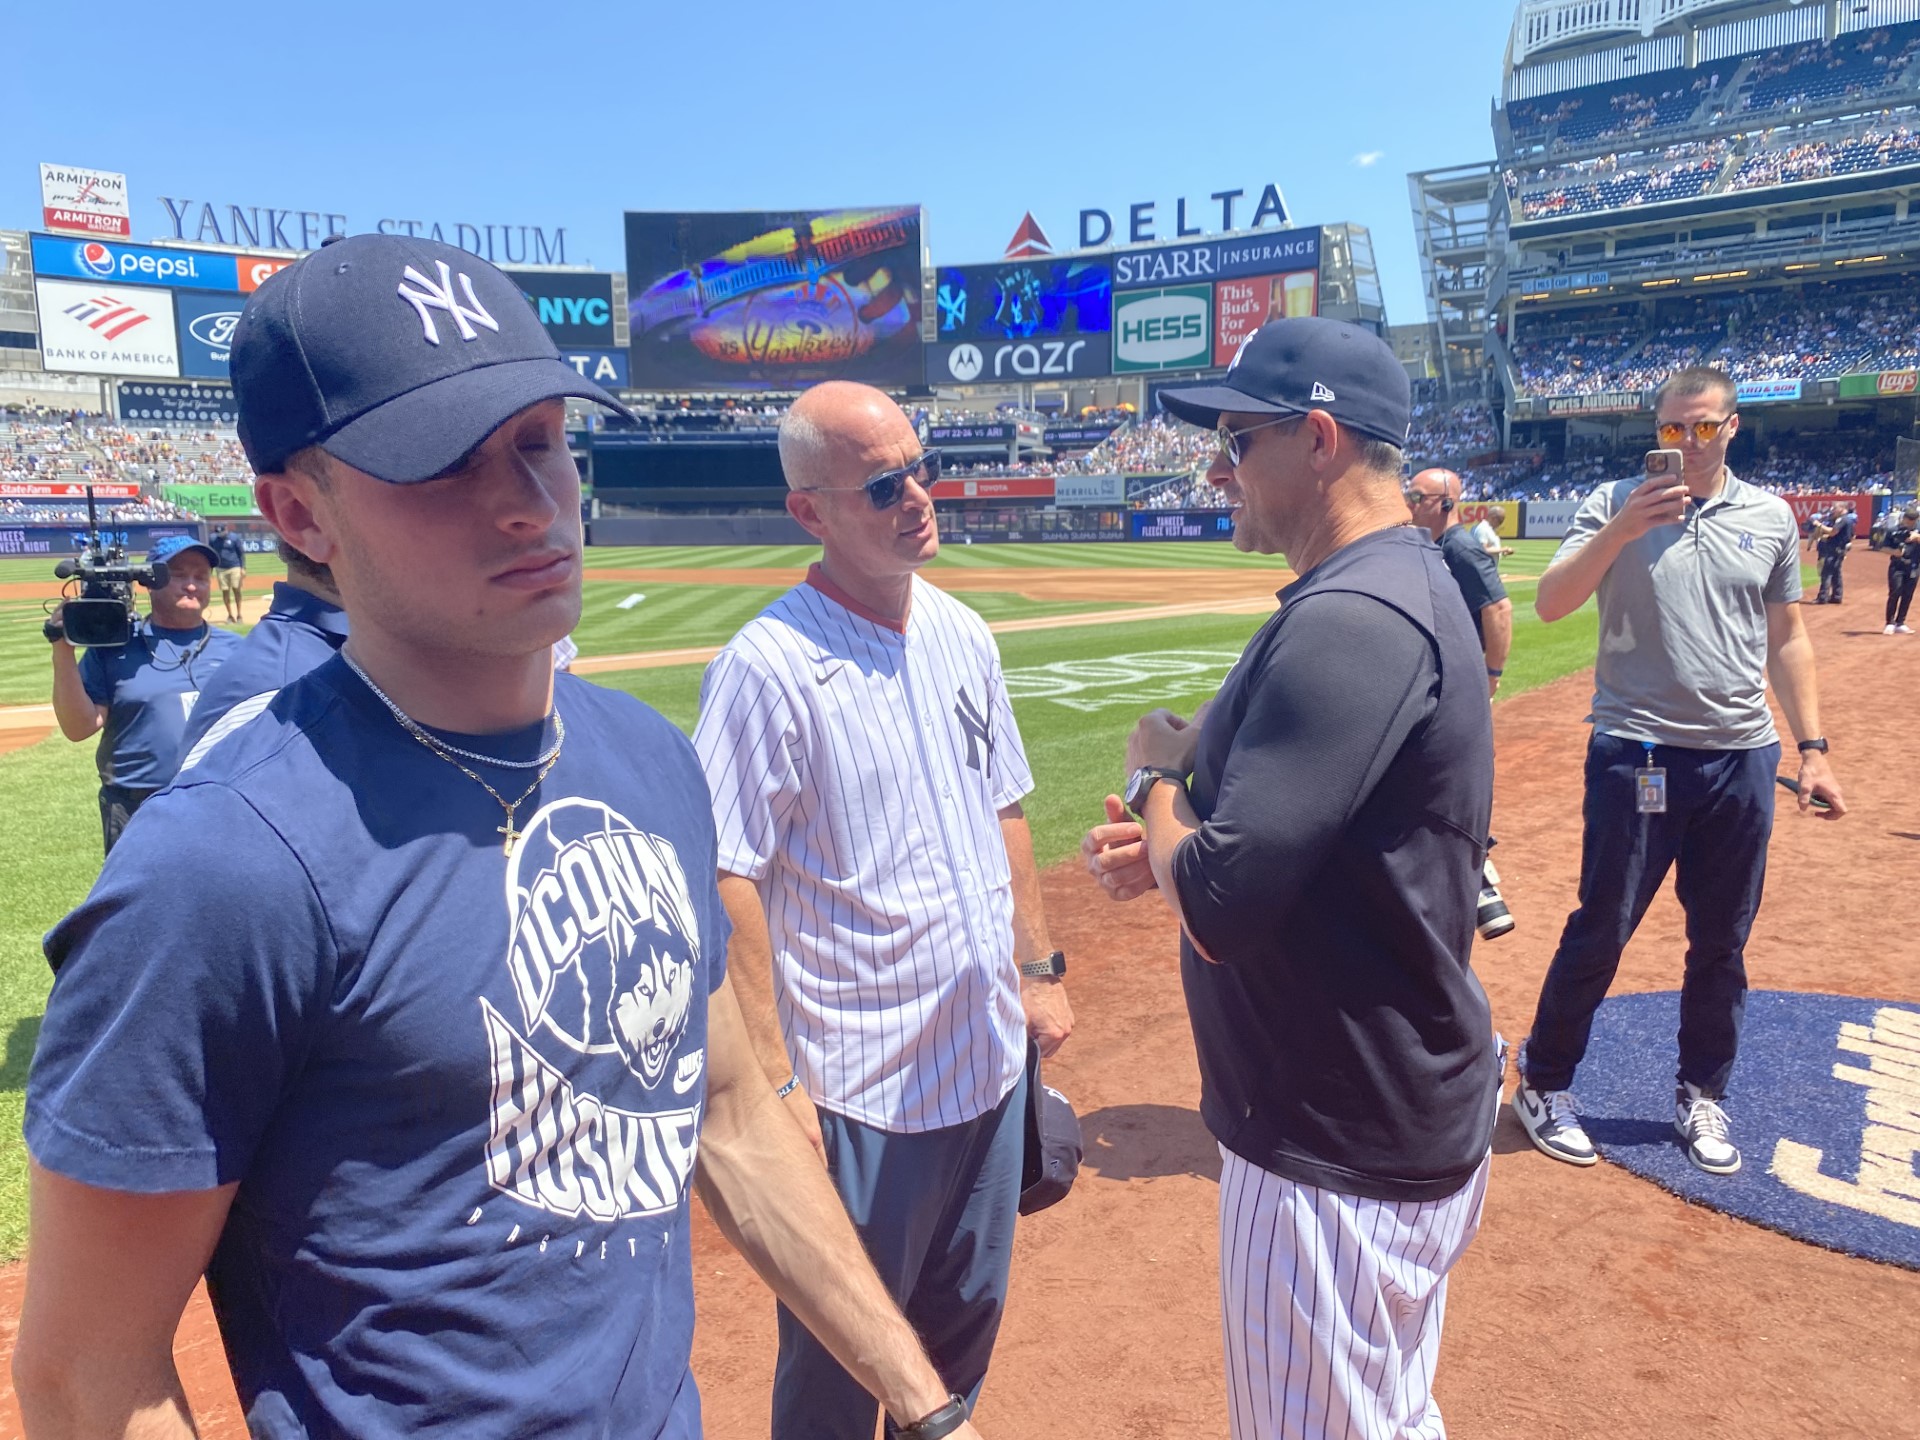 Photo: Yankees Players Warm Up for Opening Day at Yankee Stadium